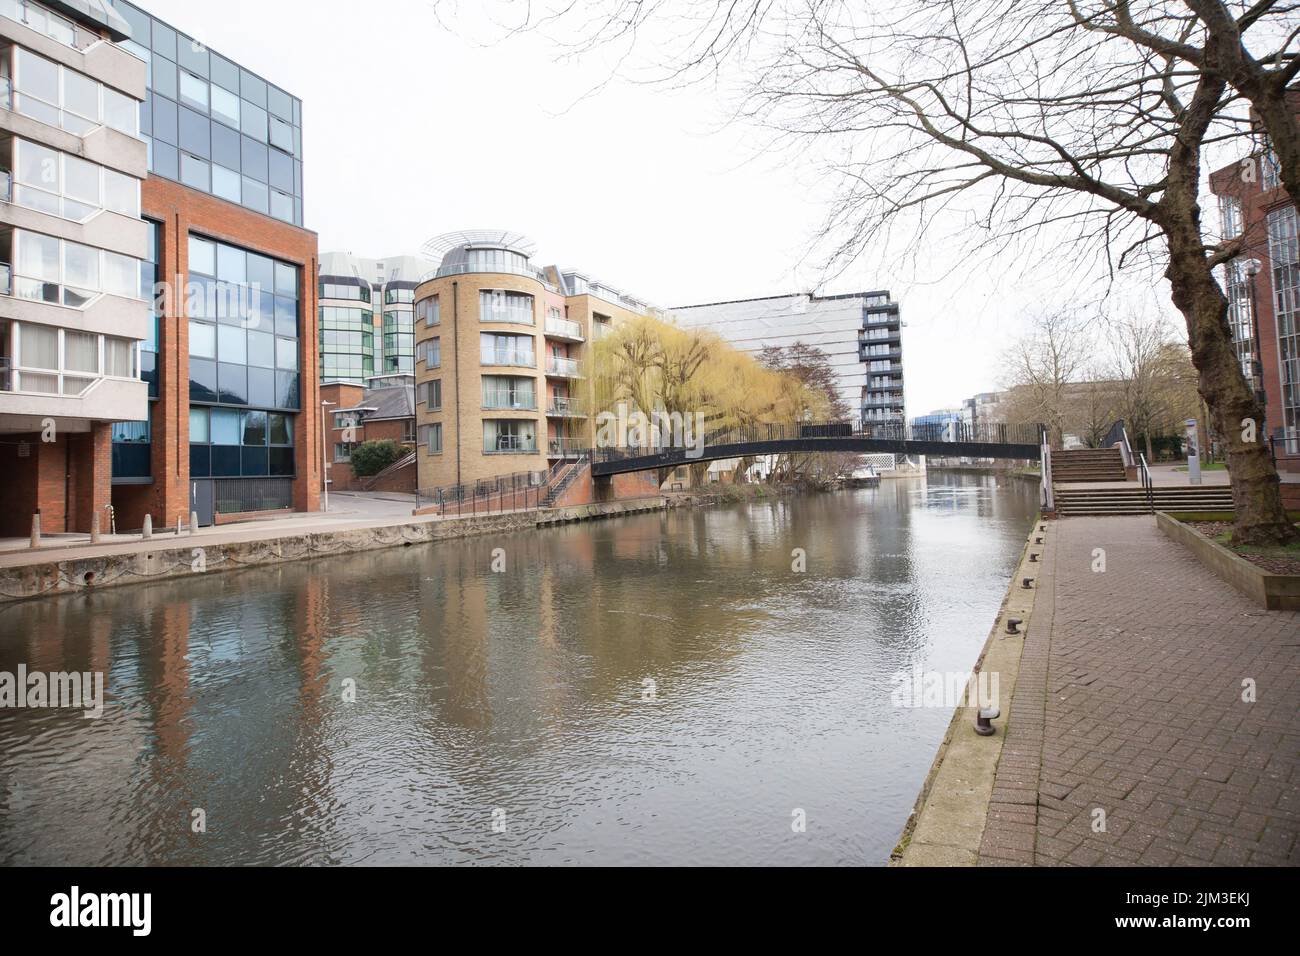 Views along the River Kennet in Reading, Berkshire in the UK Stock Photo